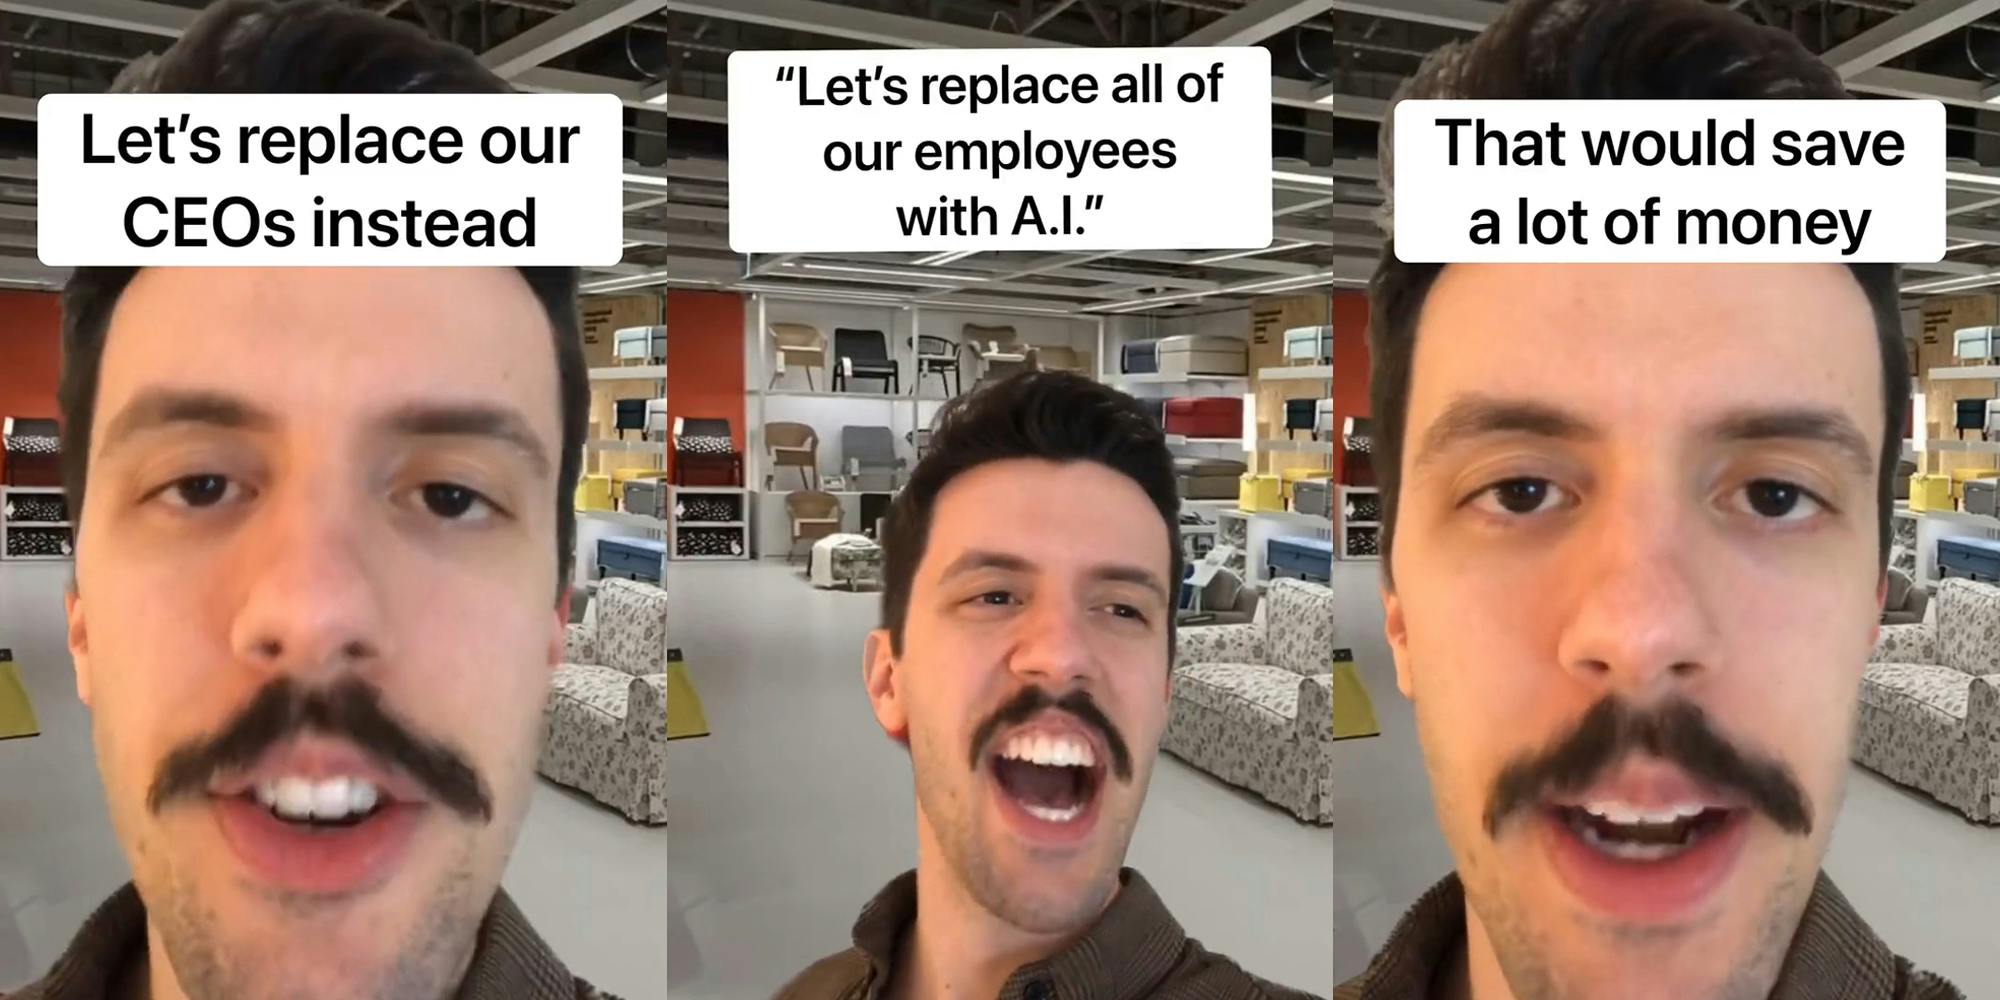 man speaking over IKEA background with caption "Let's replace our CEOs instead" (l) man speaking over IKEA background with caption ""Let's replace all of our employees with A.I"" (c) man speaking over IKEA background with caption "That would save a lot of money" (r)